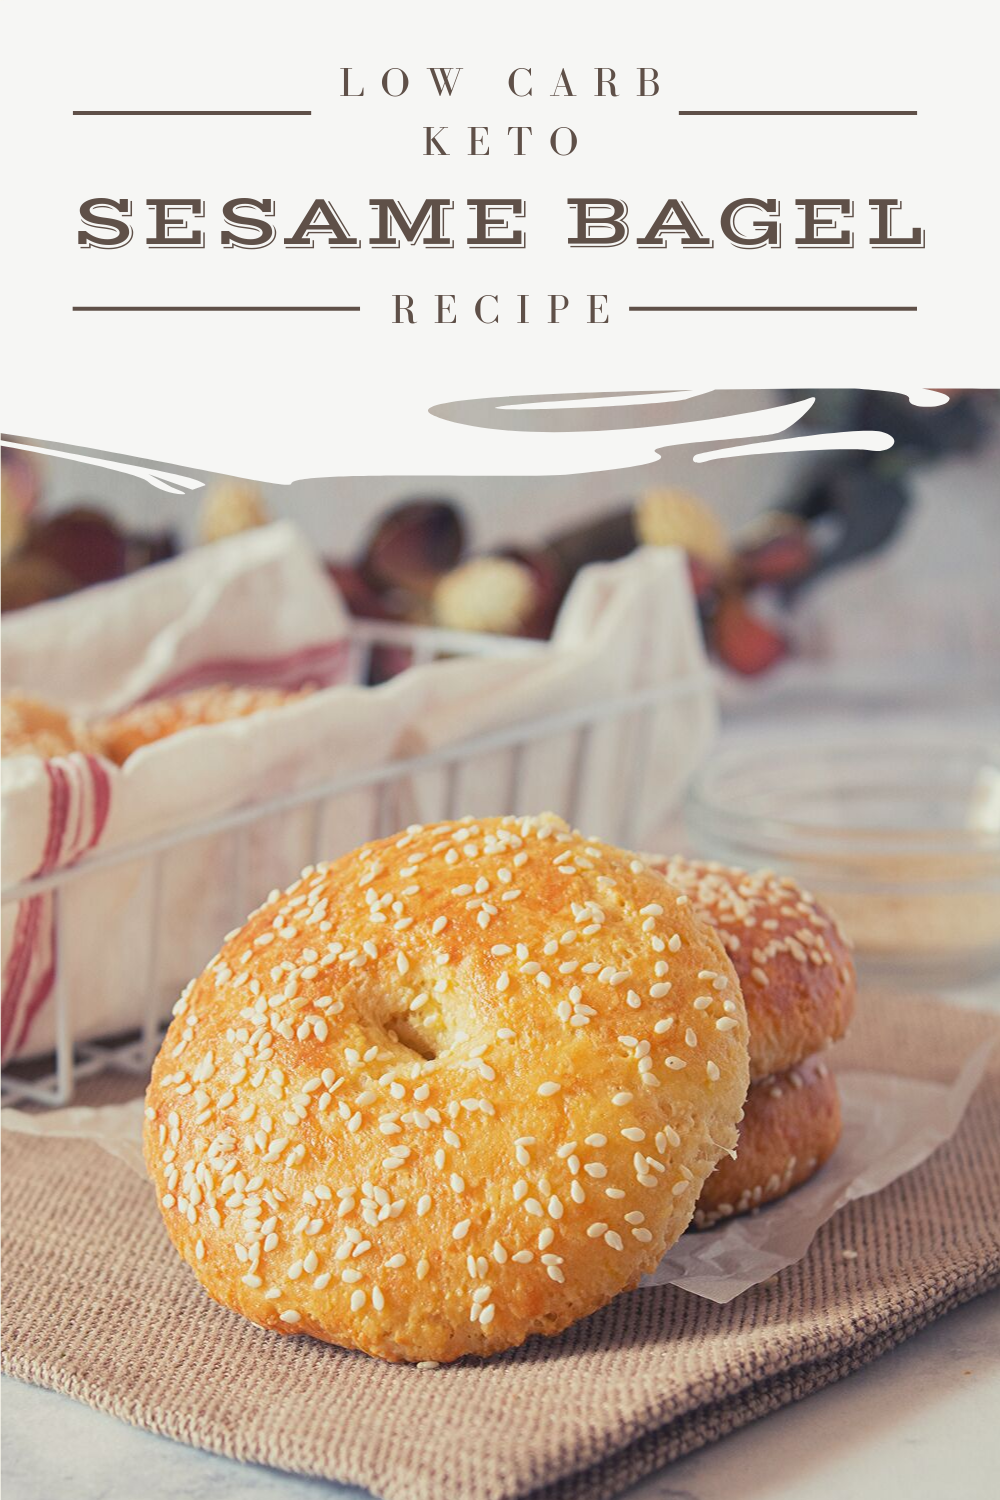 Best Low Carb Keto Sesame Bagel Recipe With Almond Flour